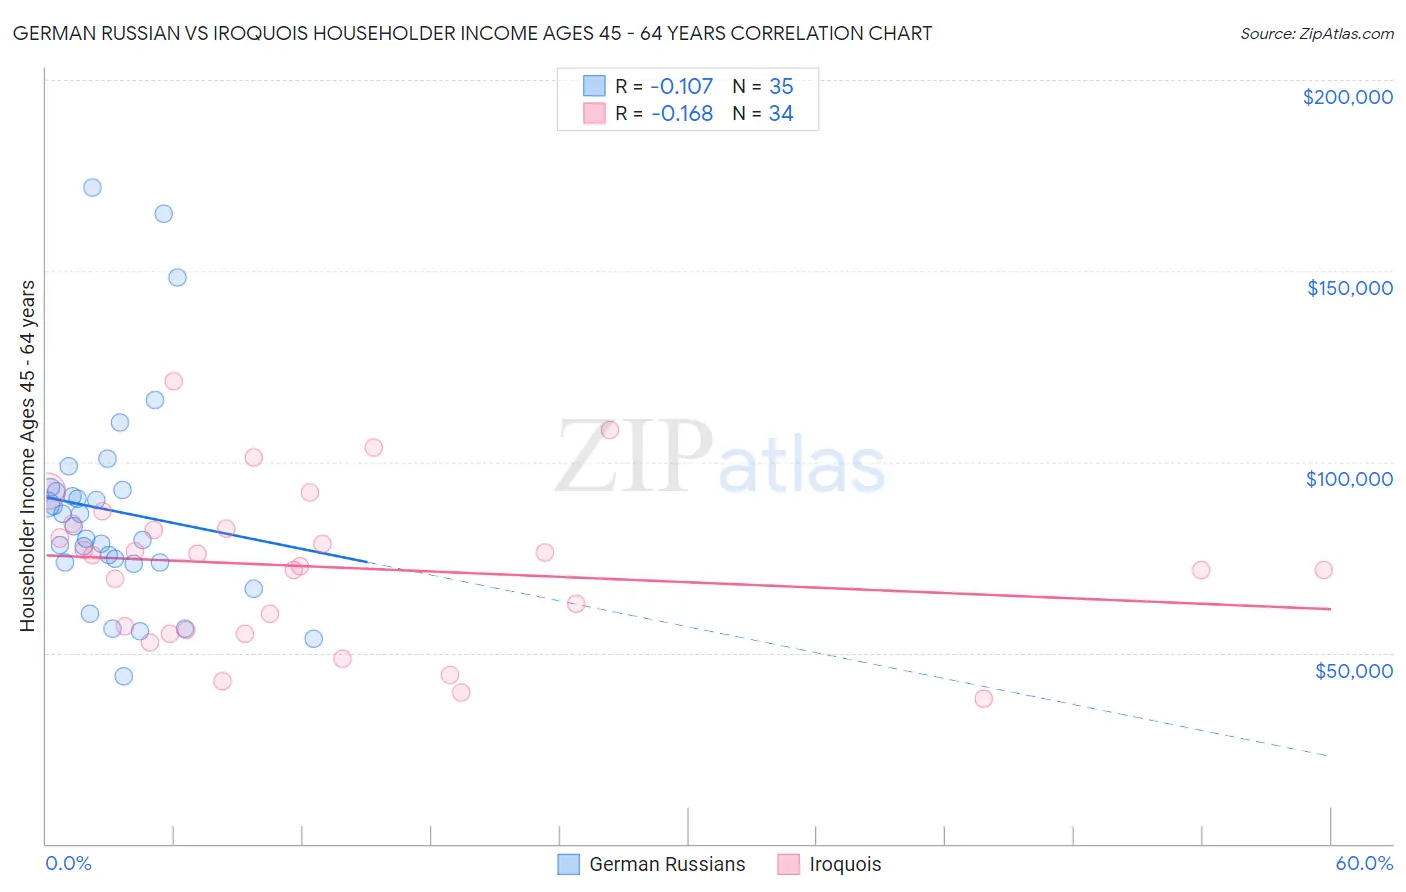 German Russian vs Iroquois Householder Income Ages 45 - 64 years